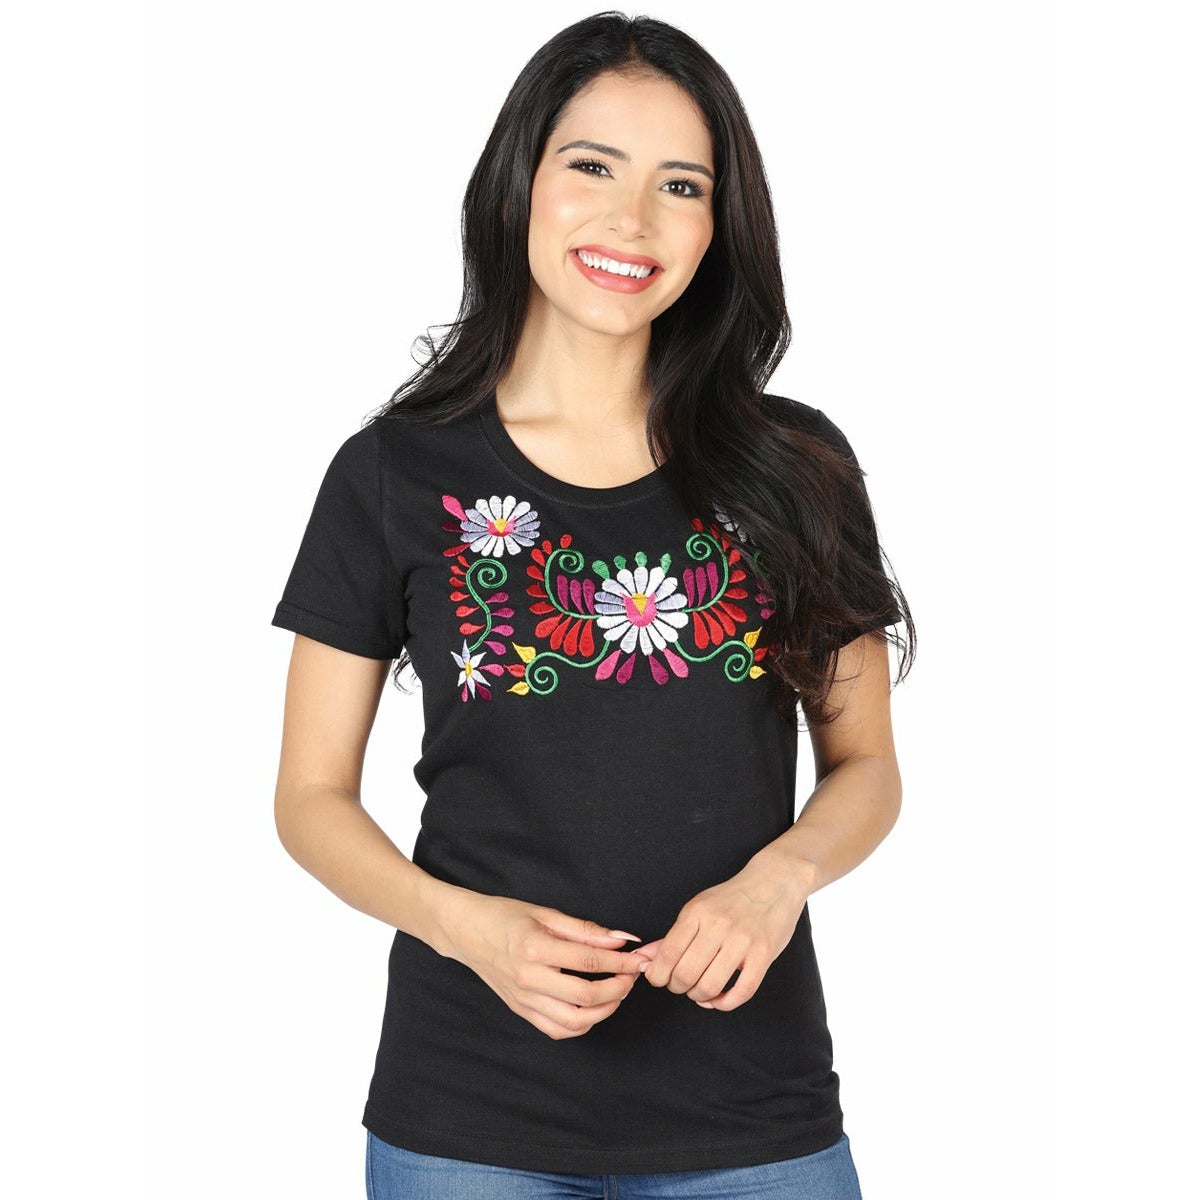 mexican embroidered shirts